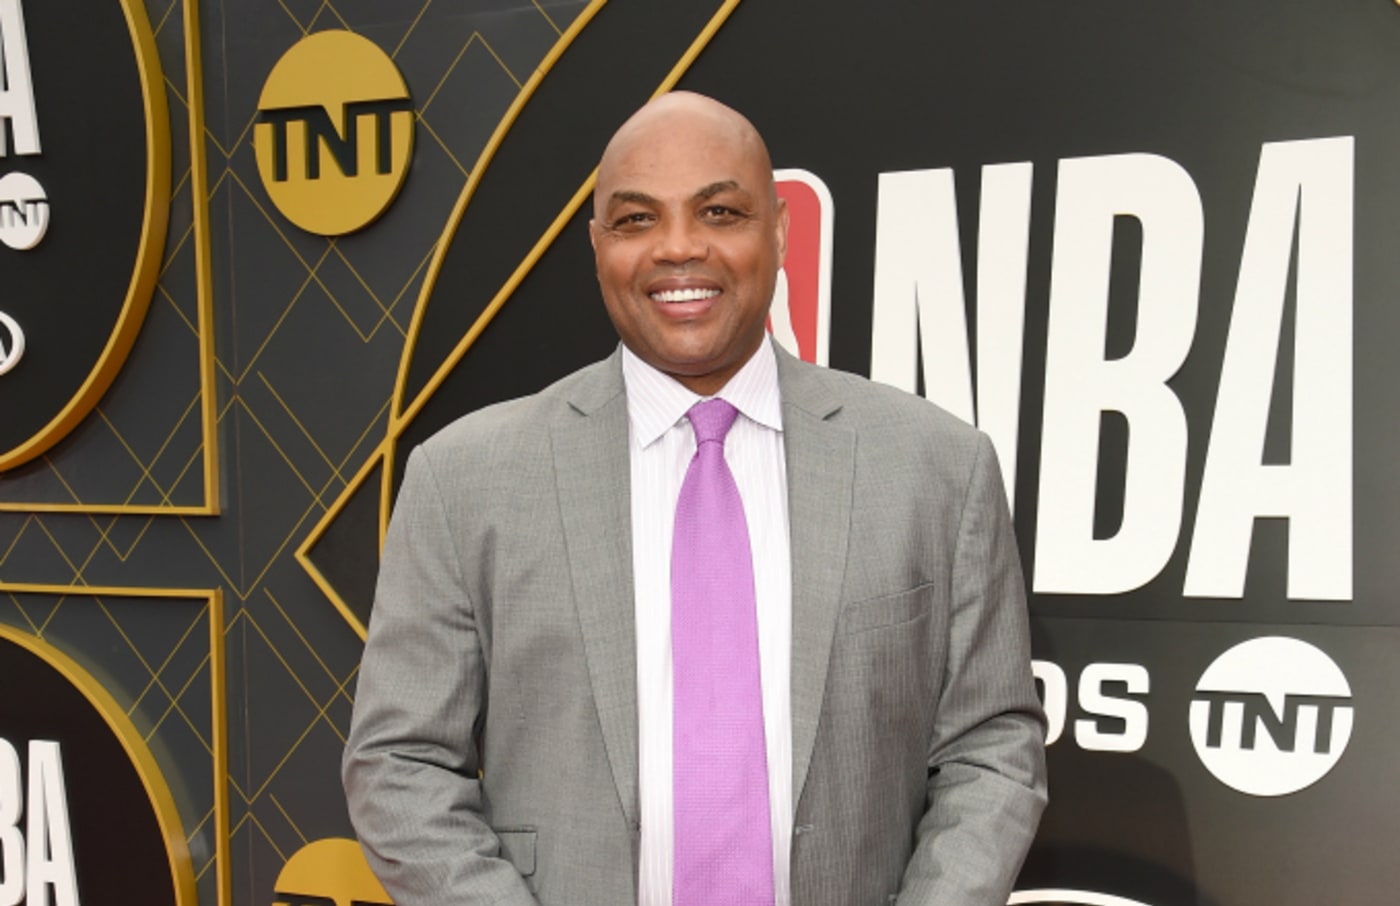 Charles Barkley attends the 2019 NBA Awards